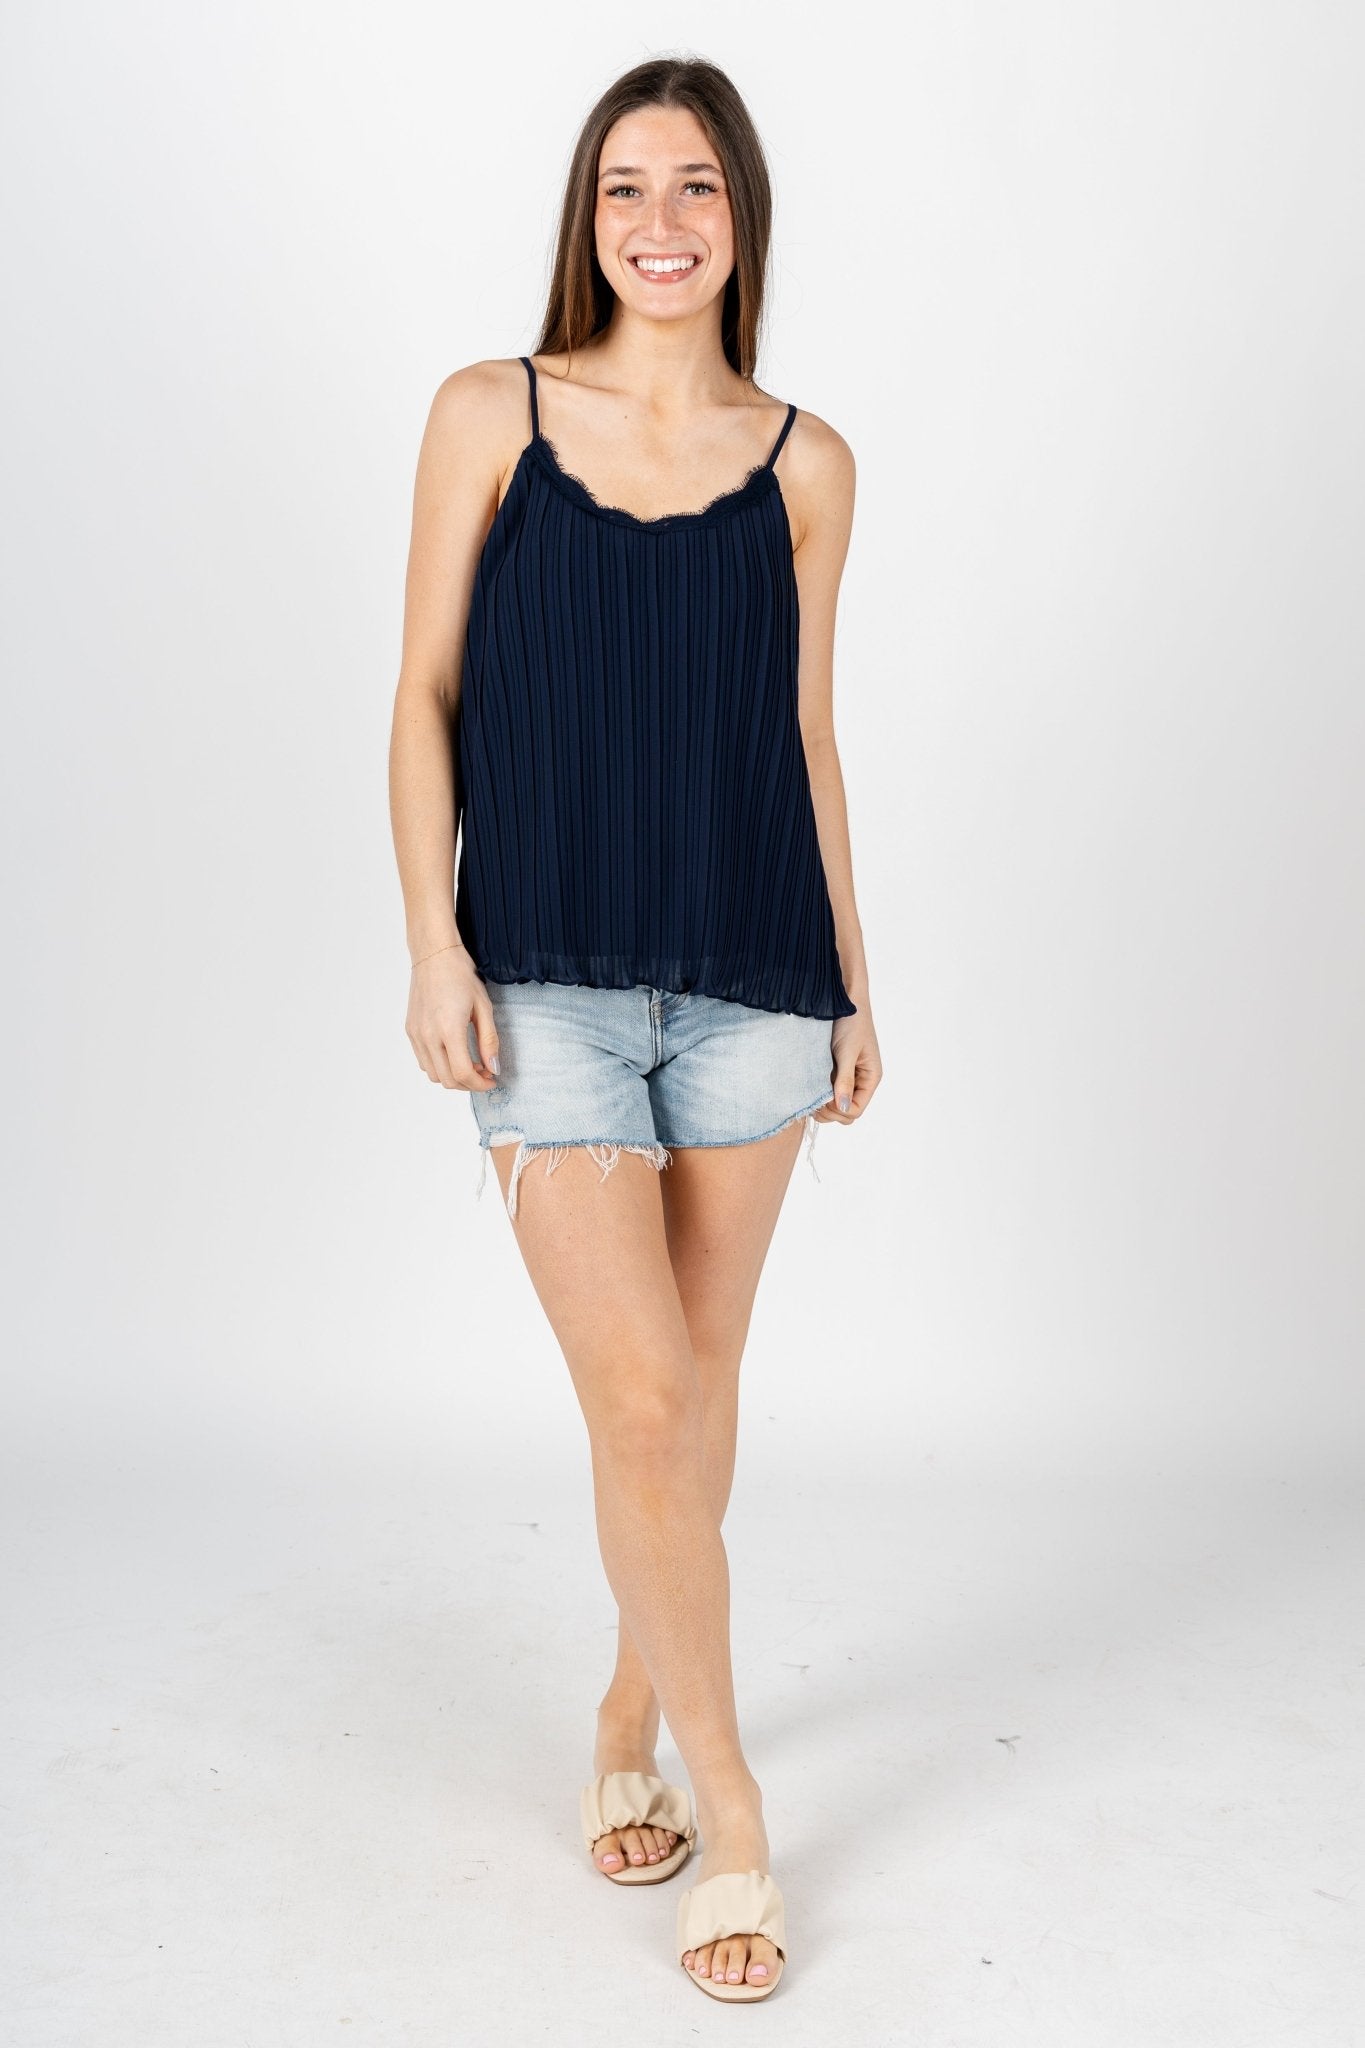 Pleated lace cami tank top navy - Stylish sweater - Trendy American Summer Fashion at Lush Fashion Lounge Boutique in Oklahoma